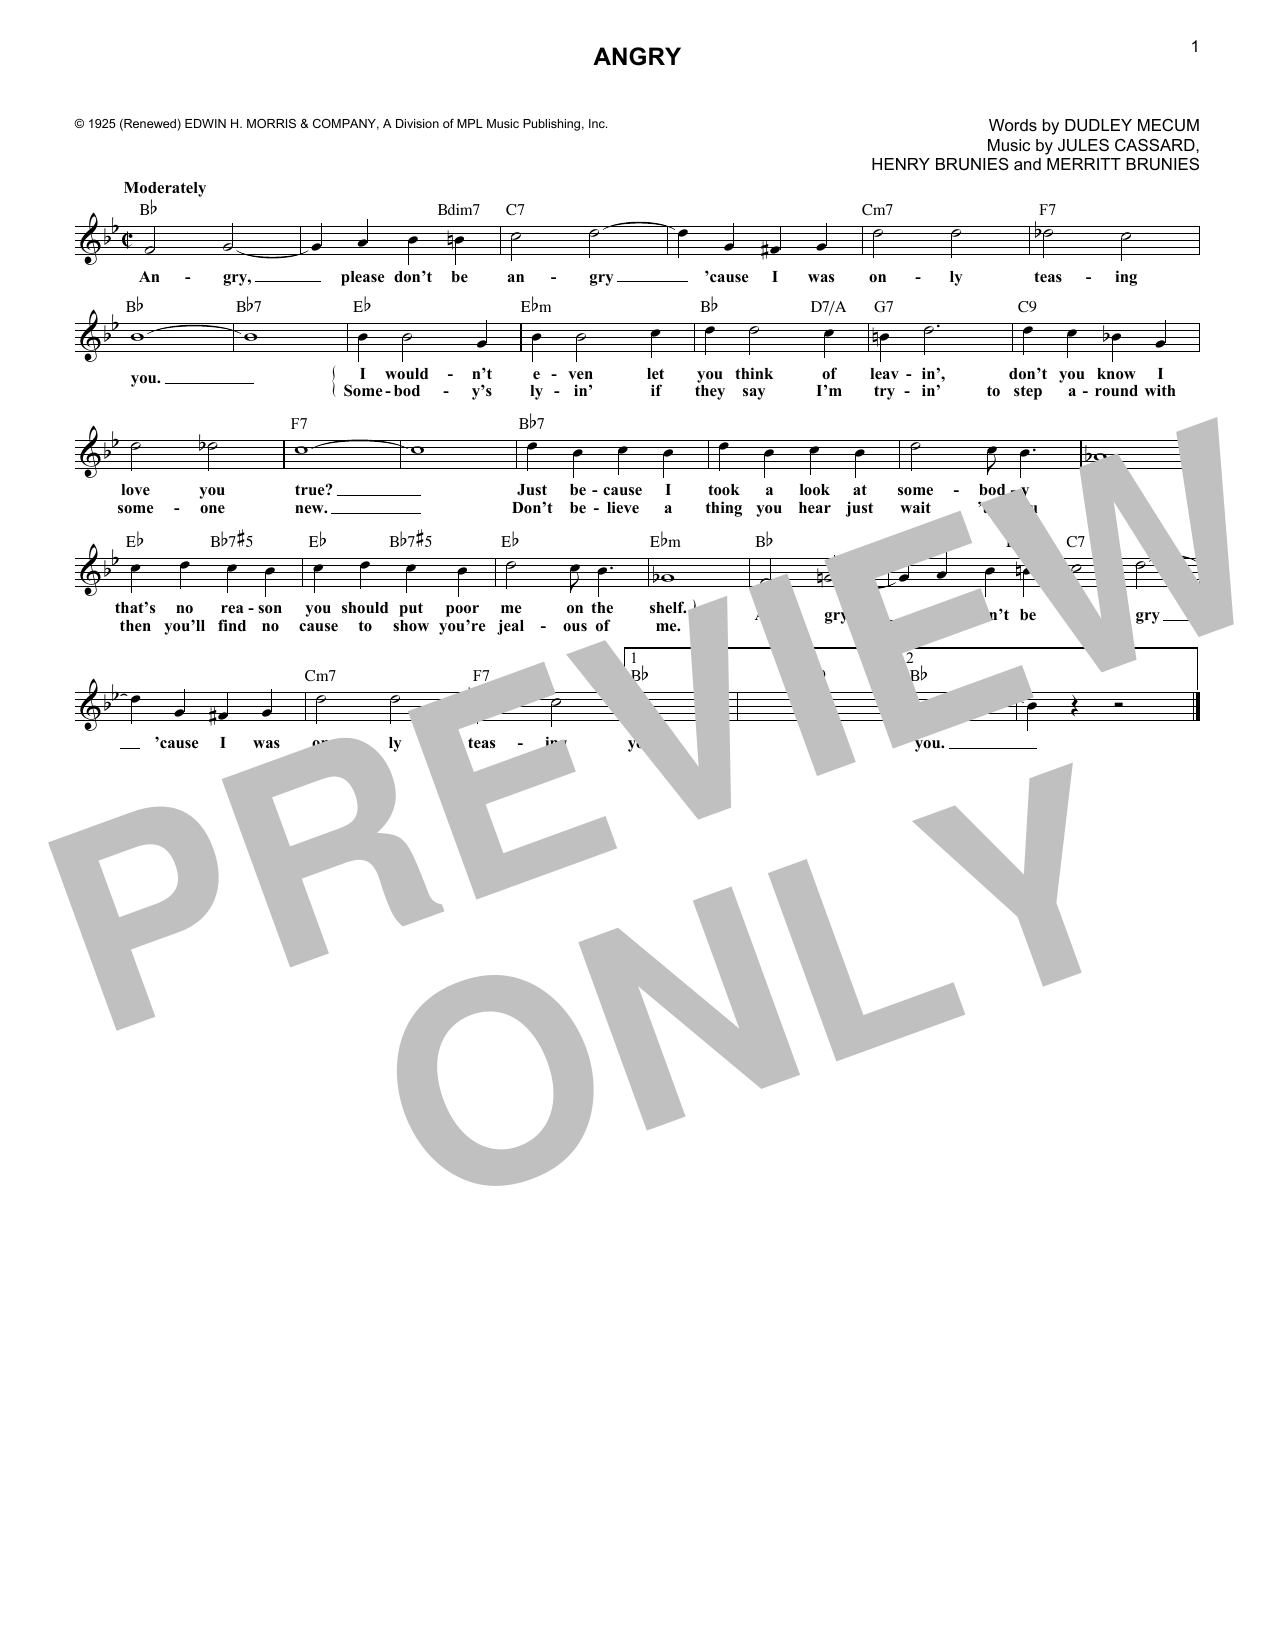 Download Dudley Mecum Angry Sheet Music